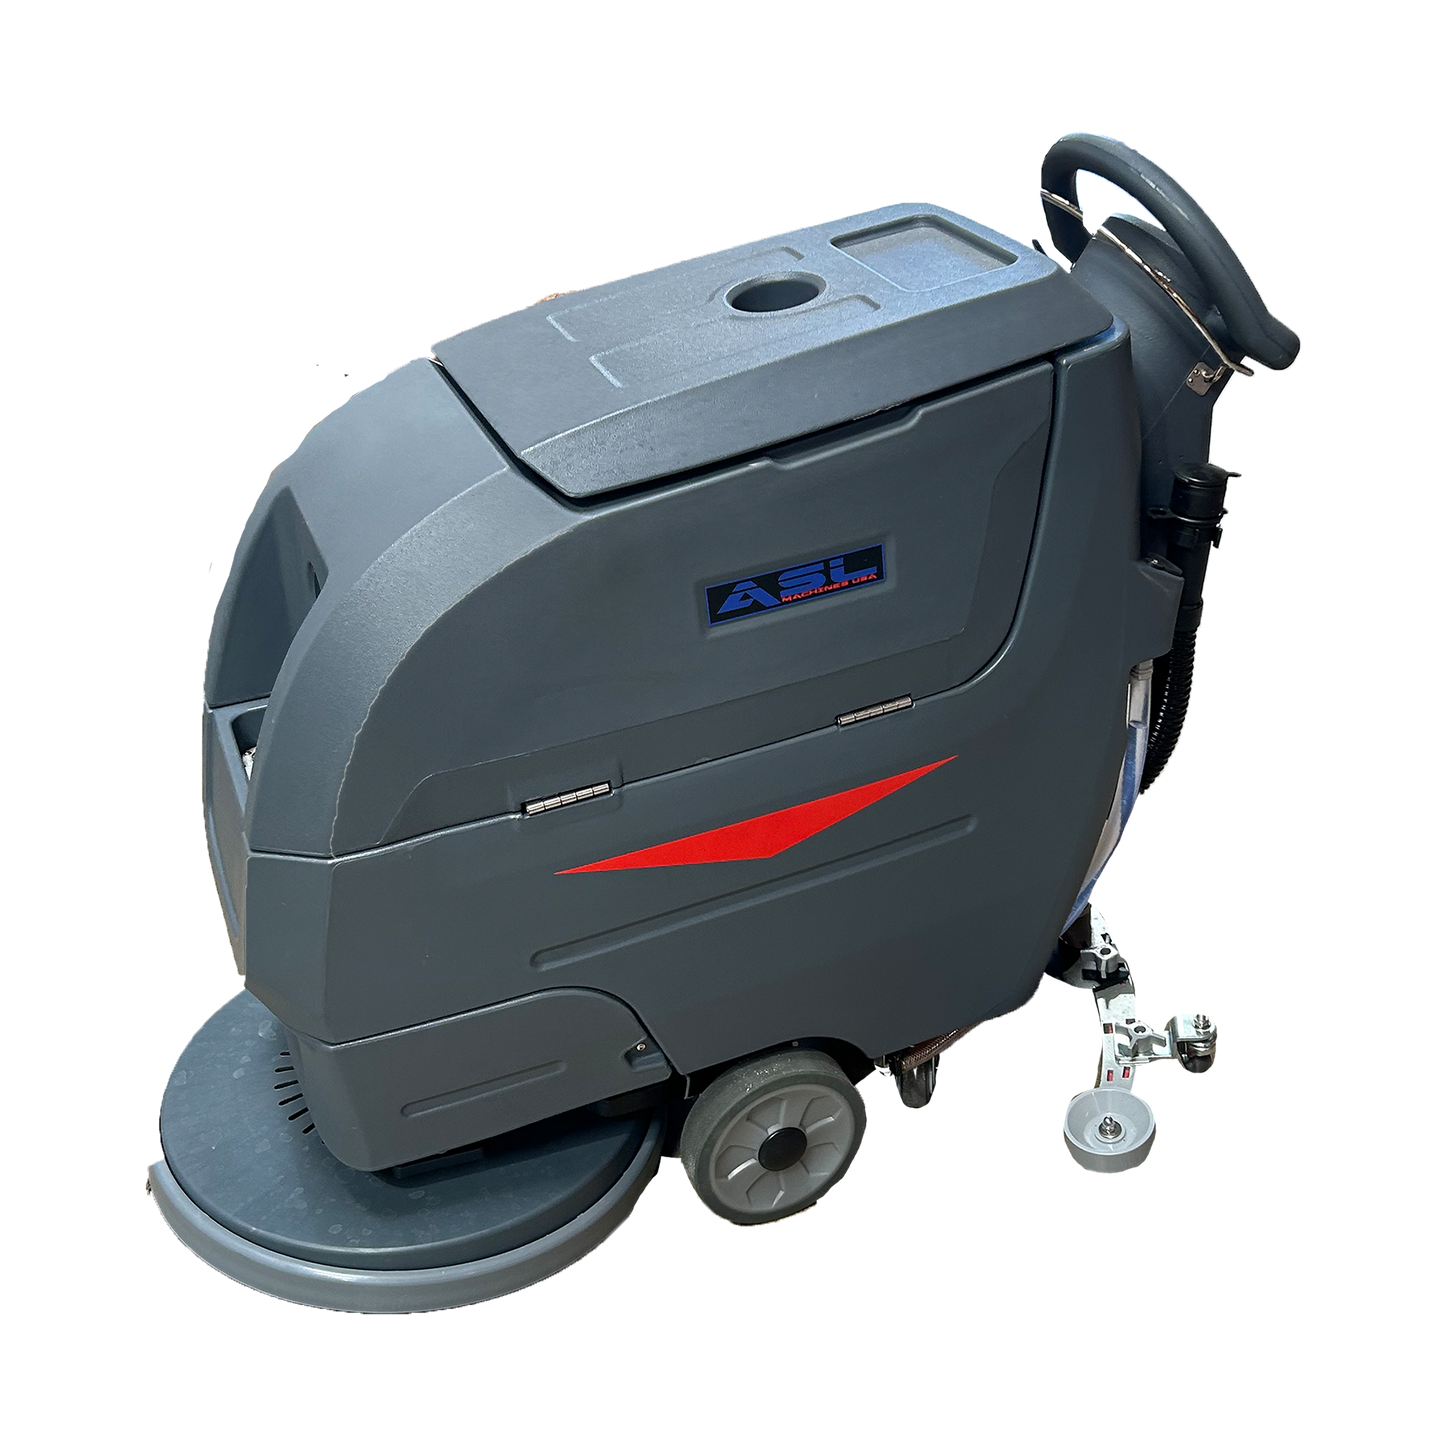 ASL TD20 Auto Scrubber (Self Propelled)